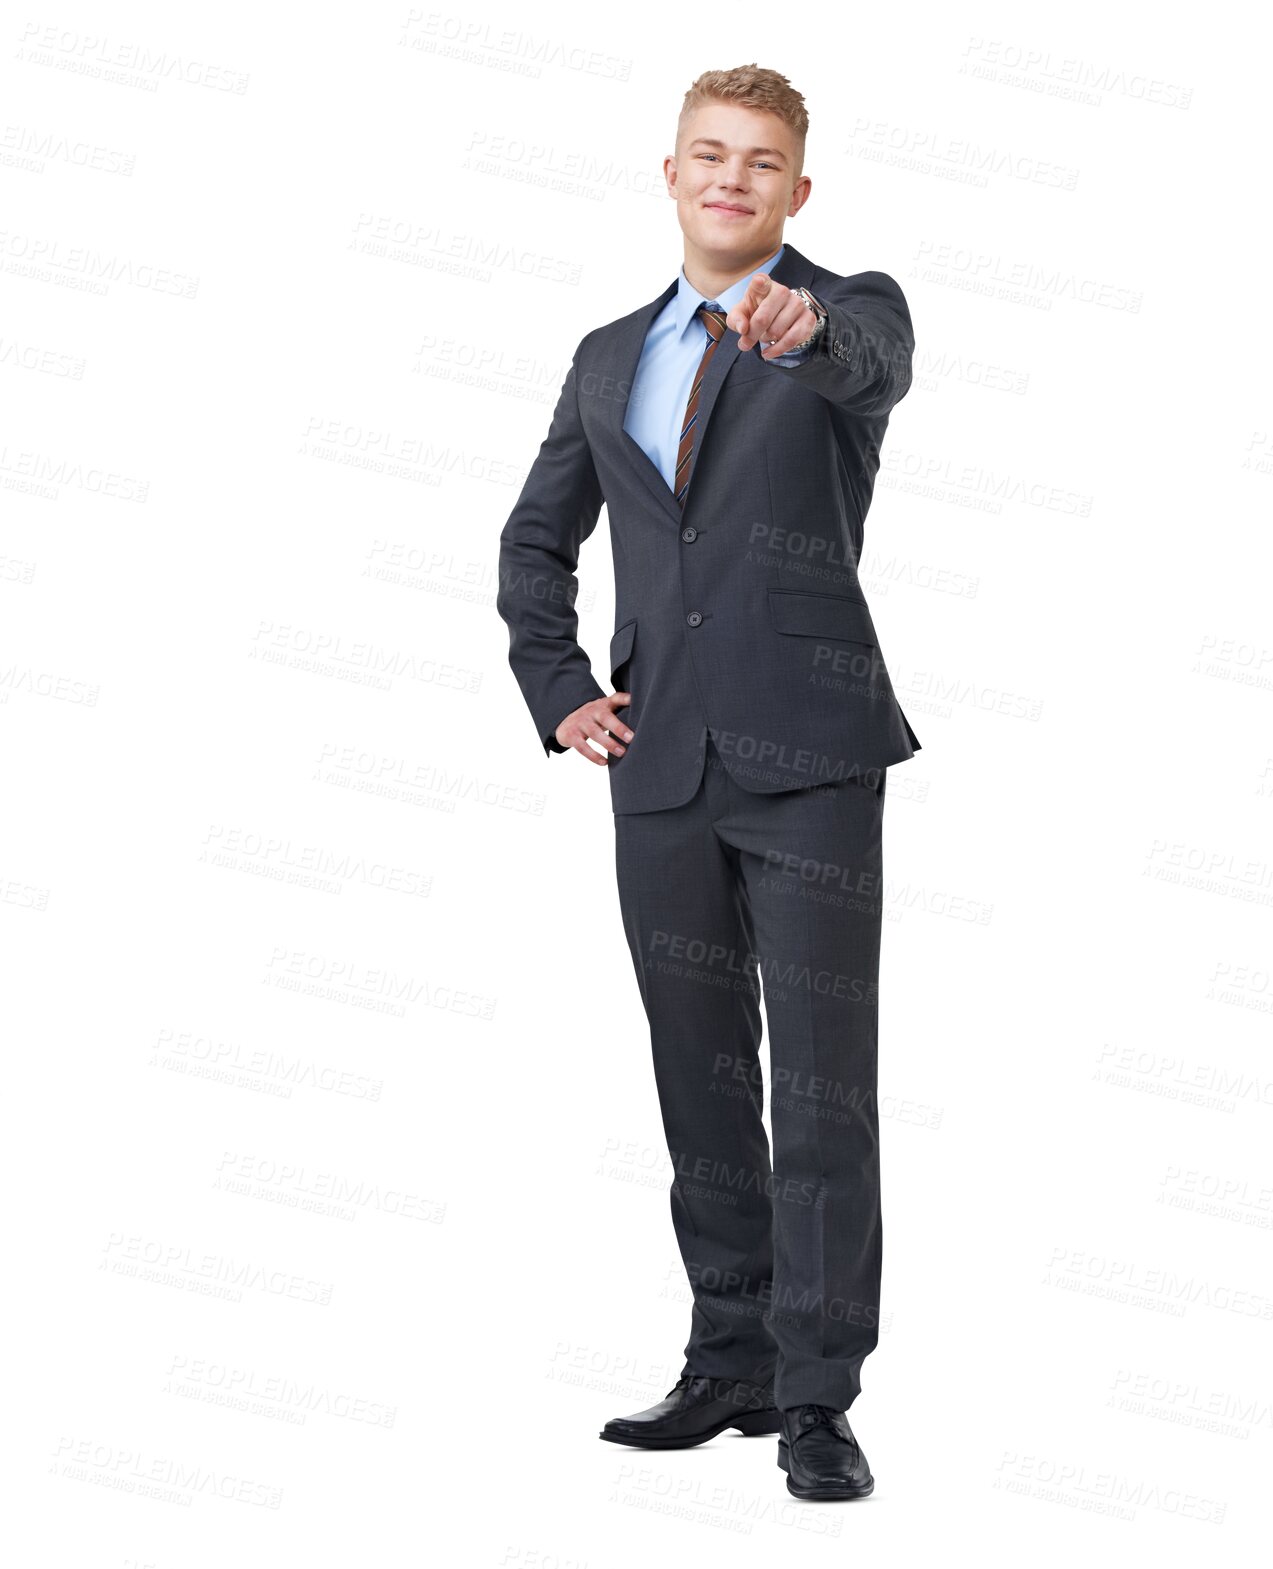 Buy stock photo Portrait, businessman or accountant pointing at you with smile isolated on transparent png background. Hand gesture, happy or proud auditor smiling with decision, accountability or choice selection